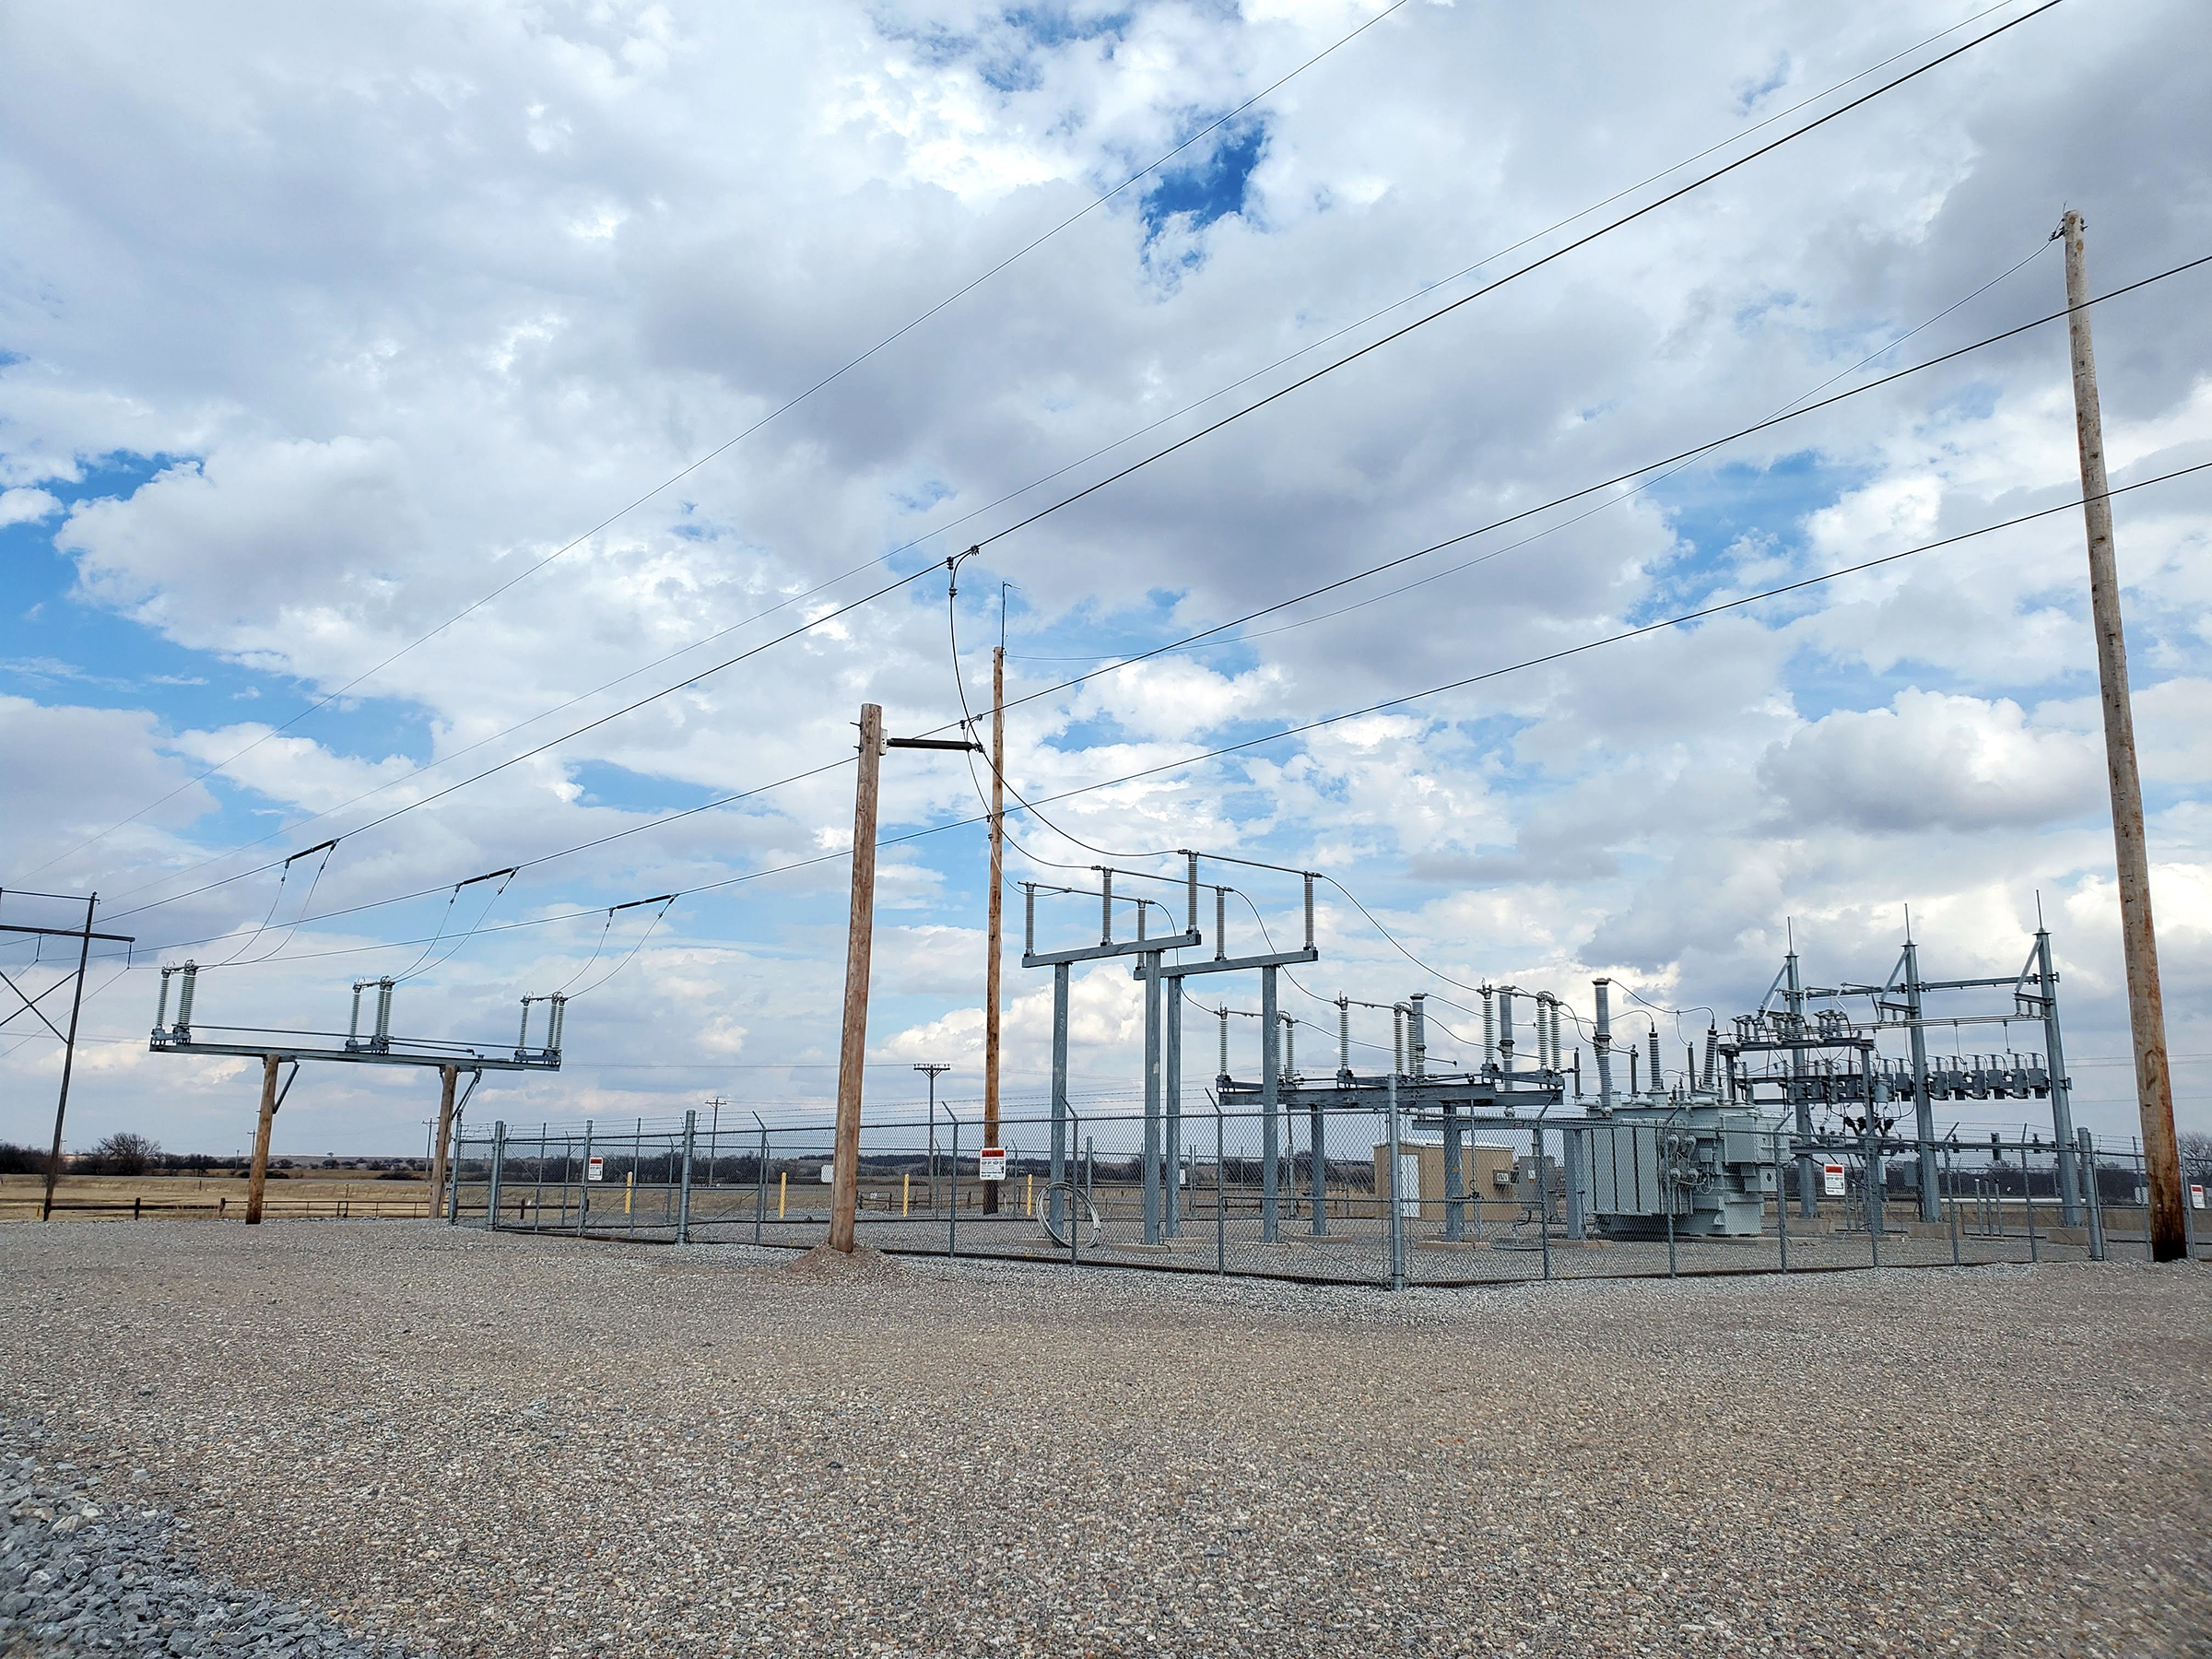 CEC® provided power substation engineering design on the loafman substation